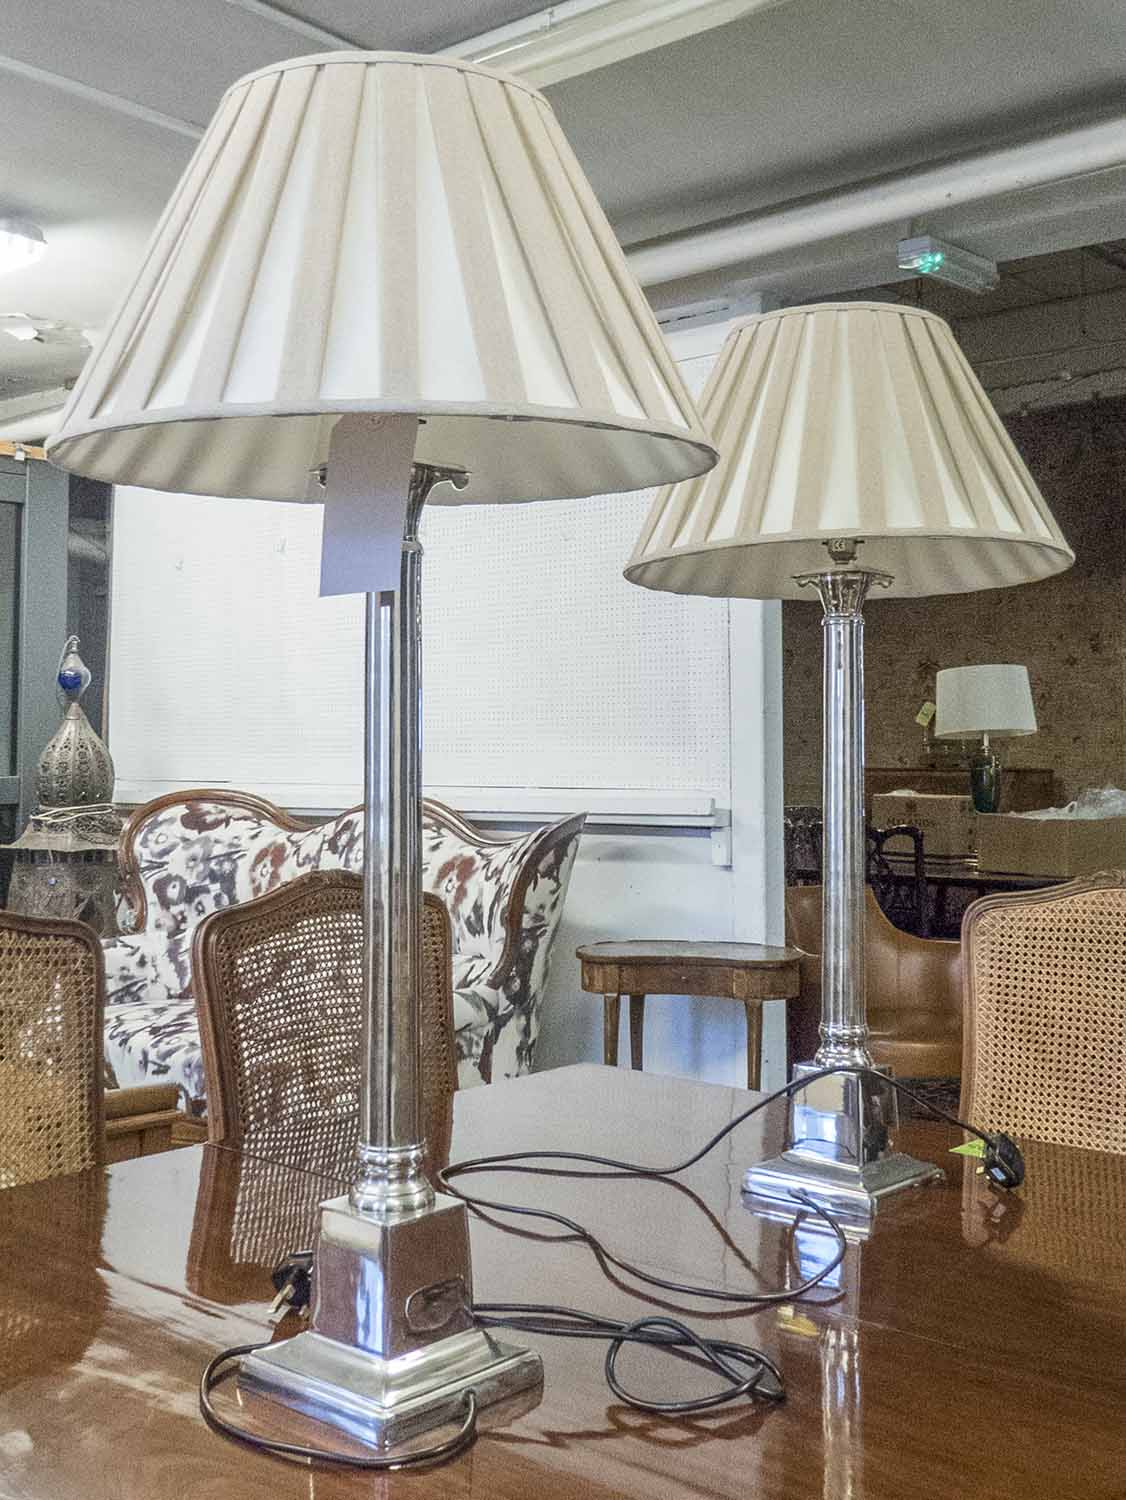 LAMPS, a pair, classical style, column chrome lamps with shades and another black column lamp, - Image 3 of 3